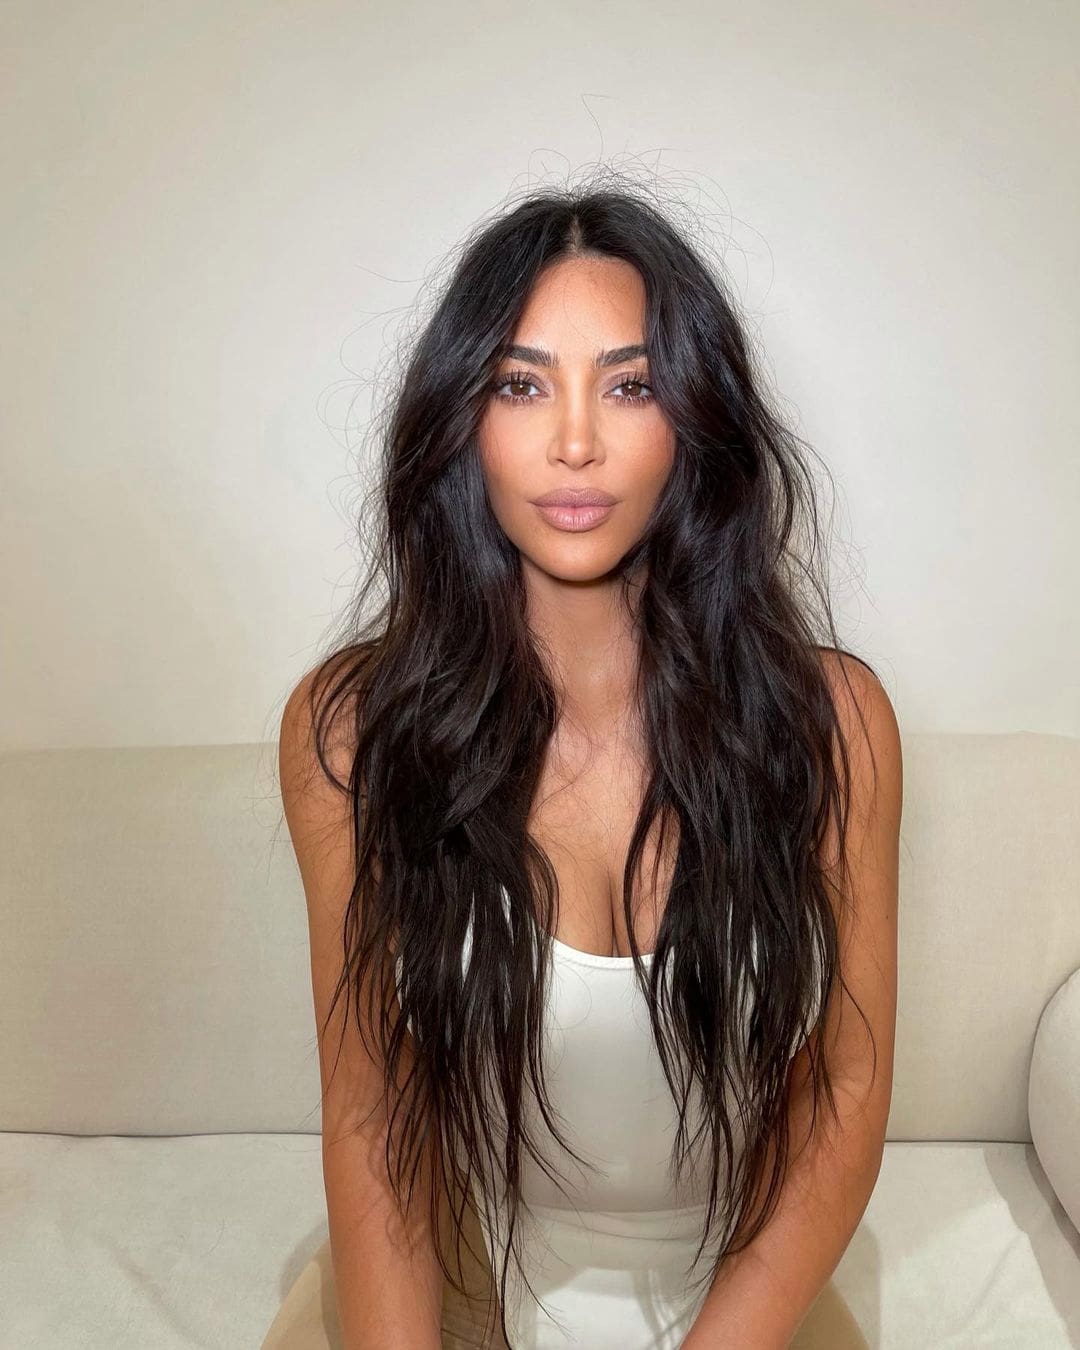 kim-kardashian-passes-an-important-exam-and-fans-congratulate-her